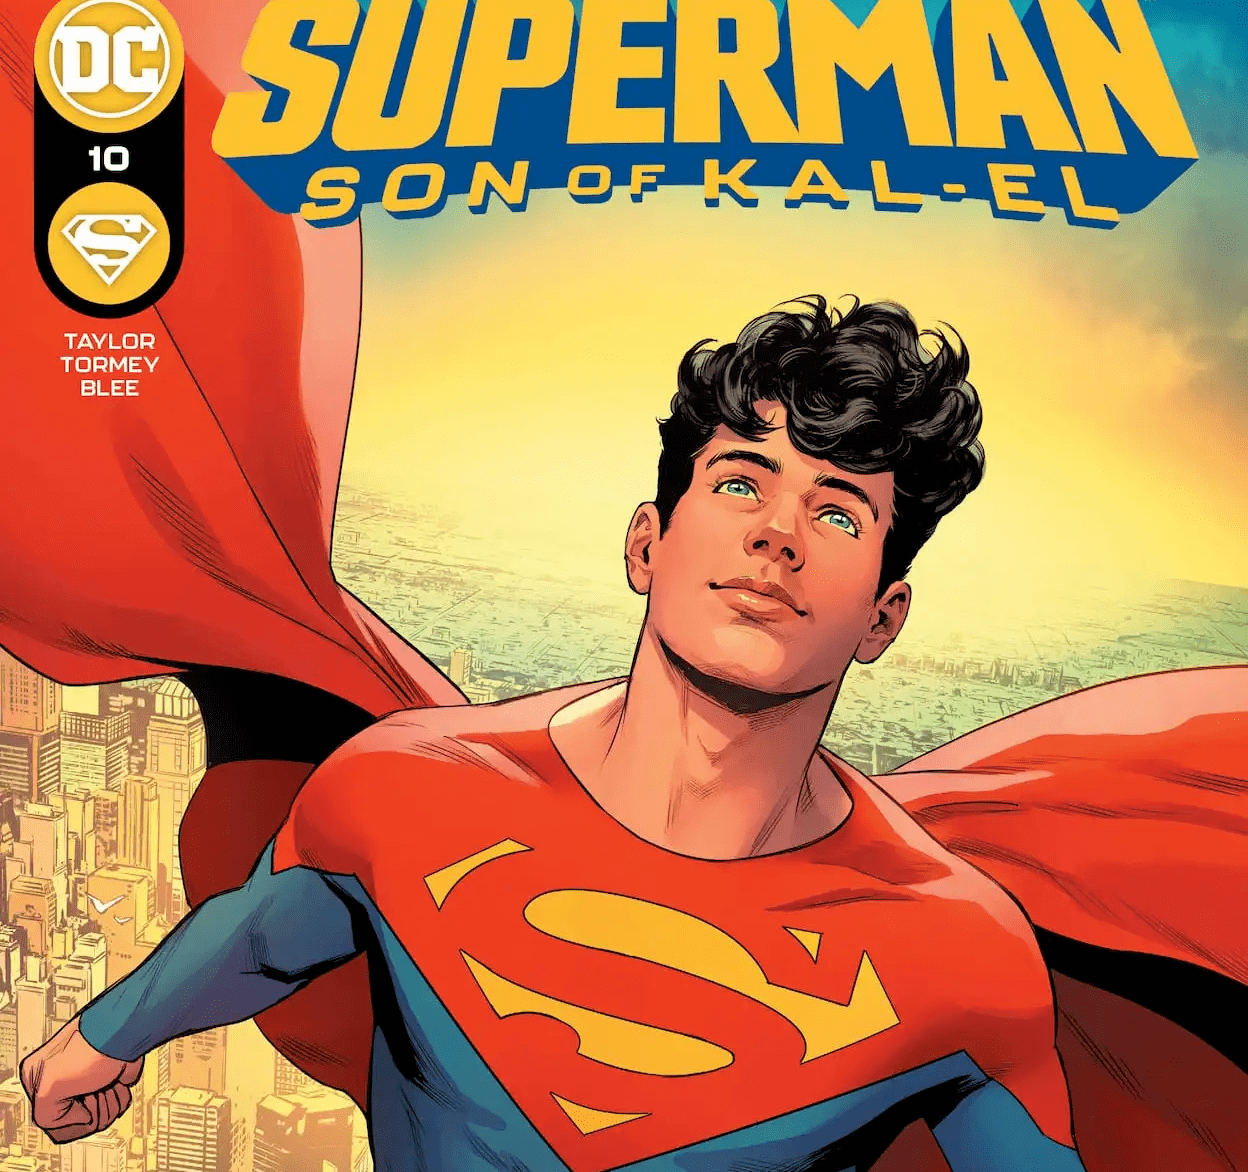 'Superman: Son of Kal-El' #10 is beautiful, poignant, and meaningful